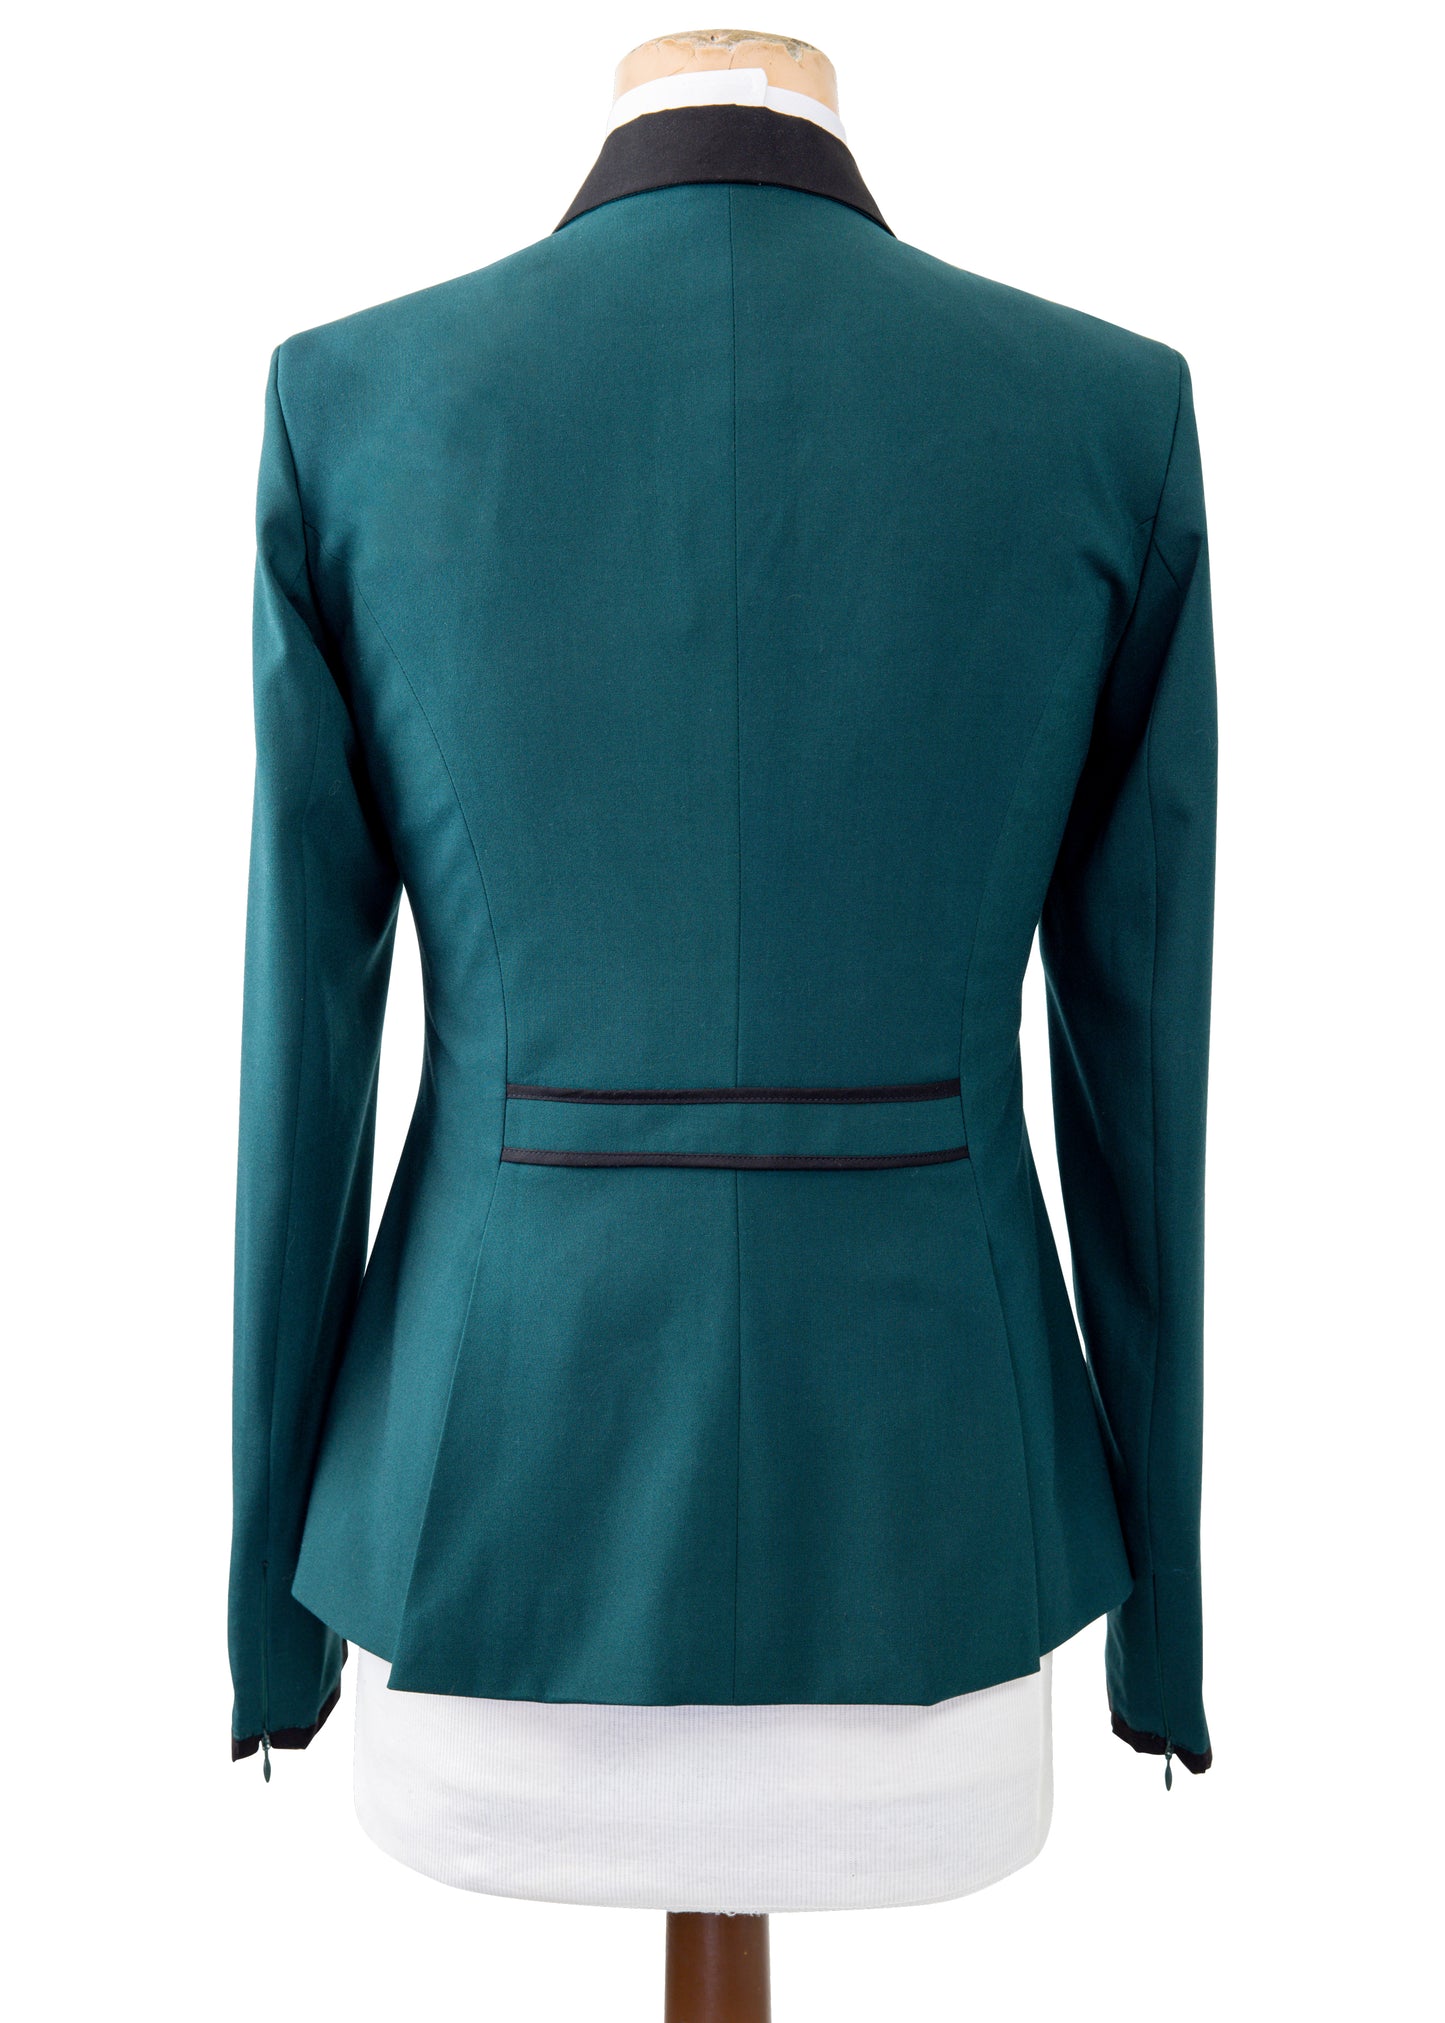 New Style Bottle Green Stretch Jacket With Black Detail